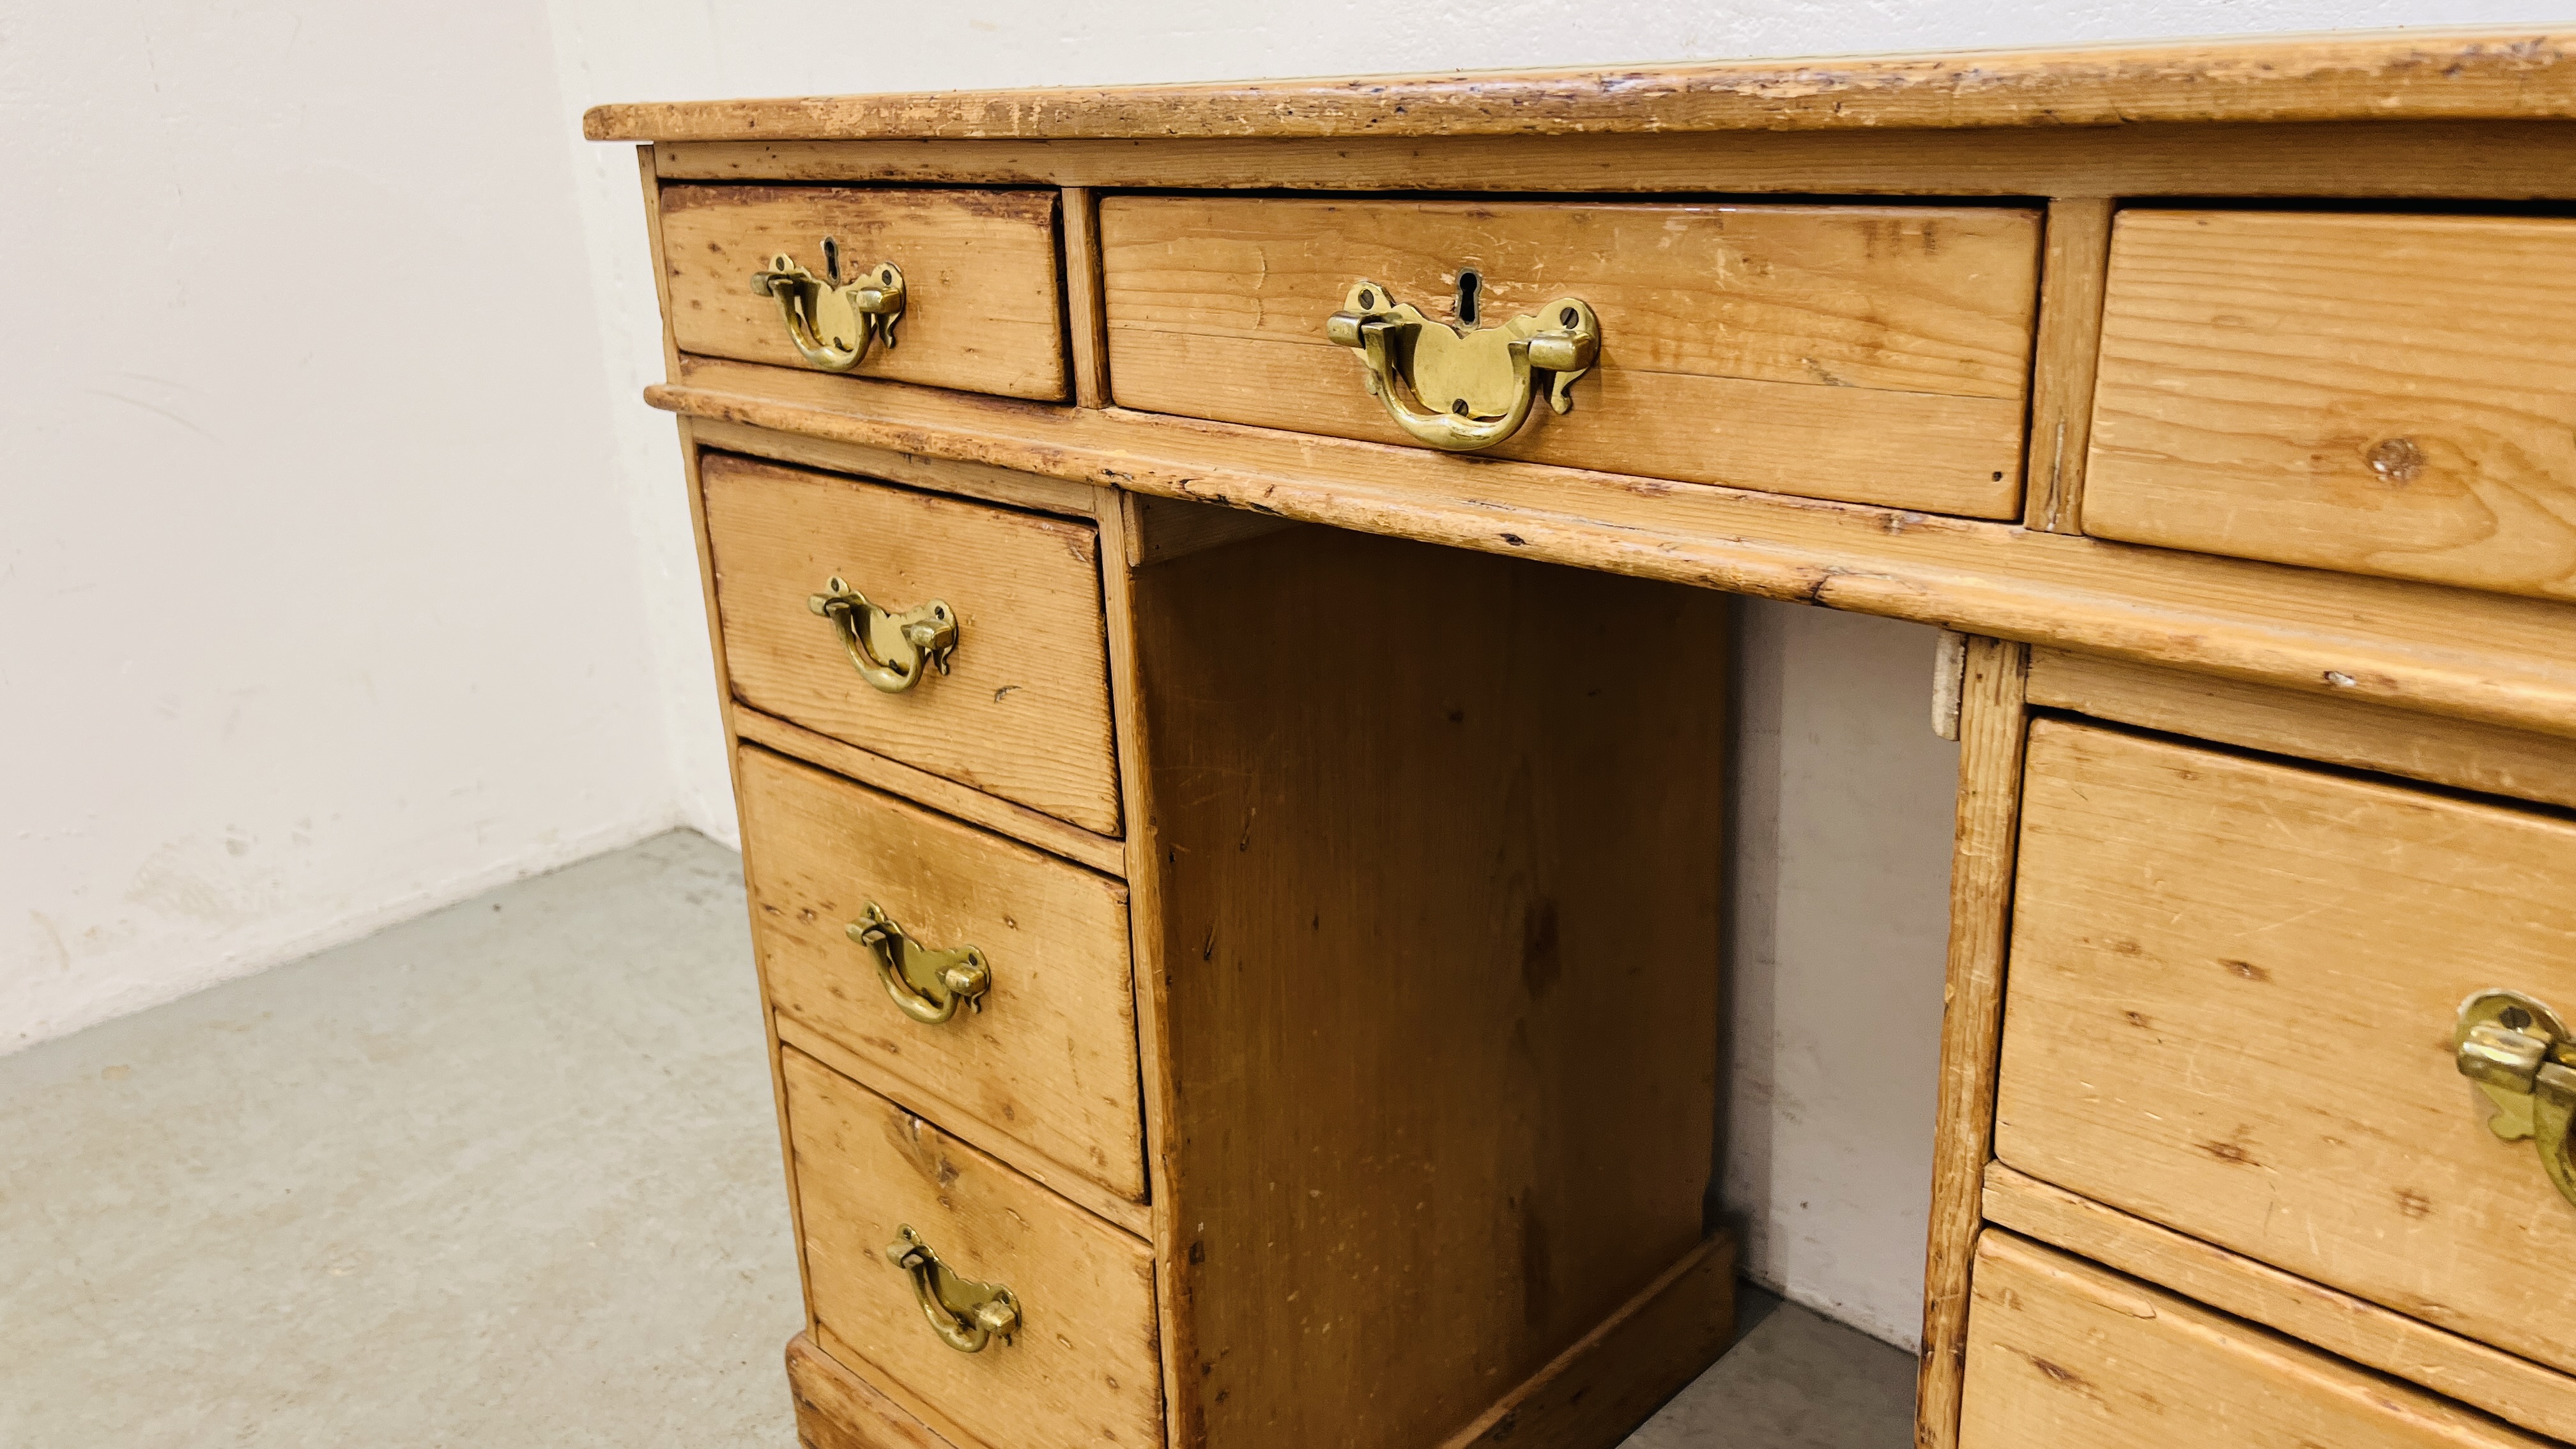 AN ANTIQUE WAXED PINE NINE DRAWER KNEEHOLE DESK WITH TOOLED LEATHER INSET TOP. - Image 6 of 11